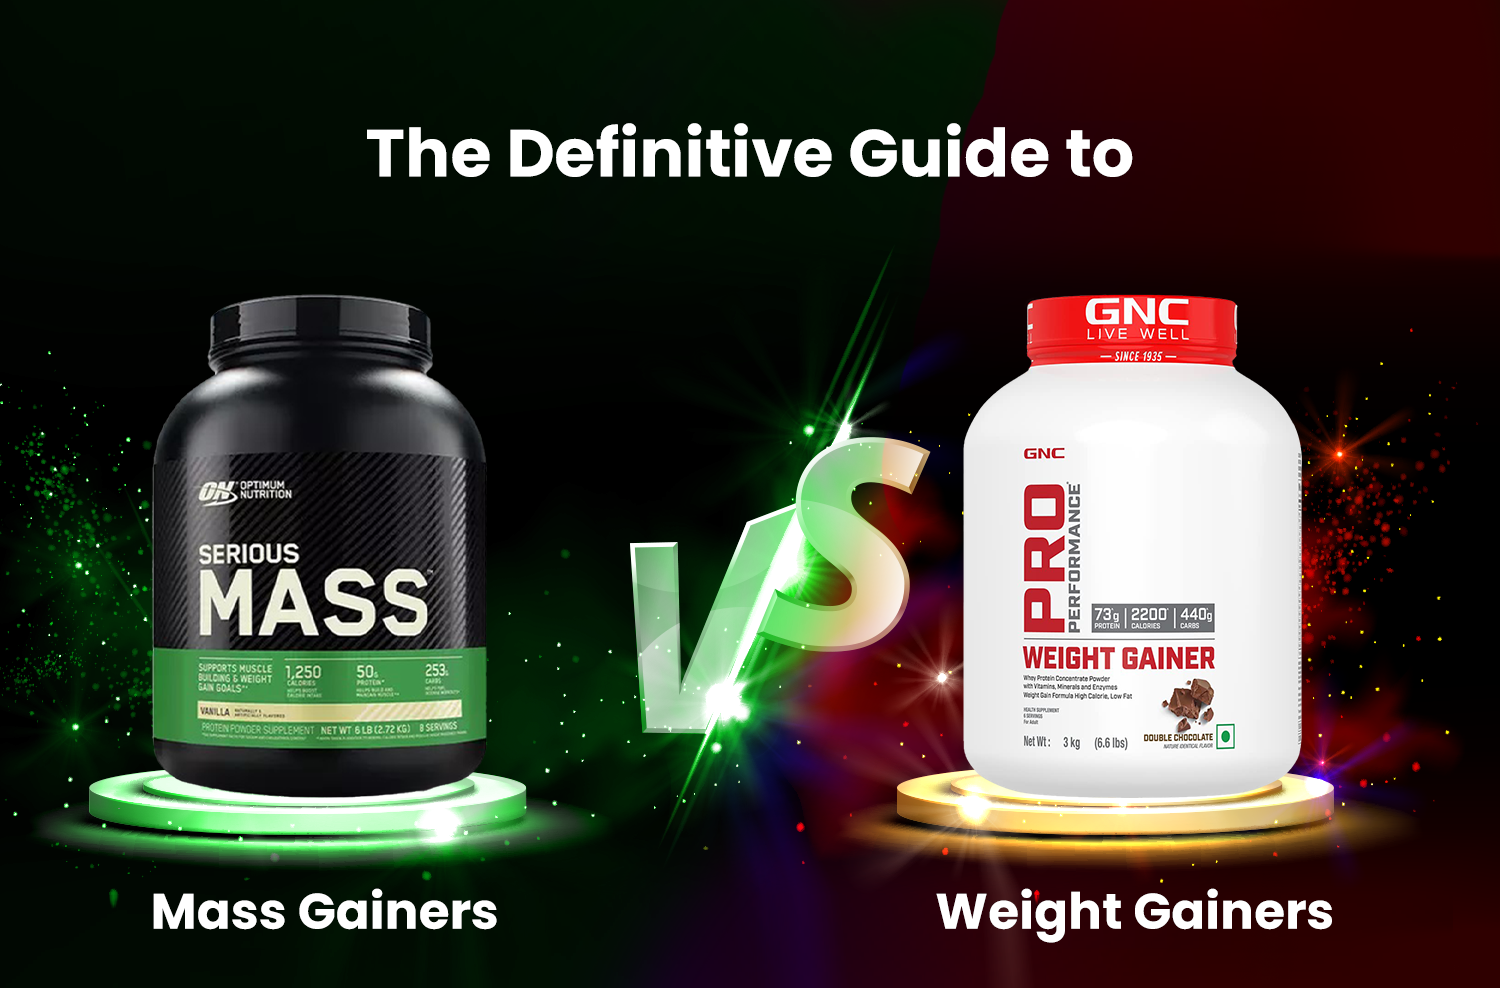 Mass Gainers vs. Weight Gainers